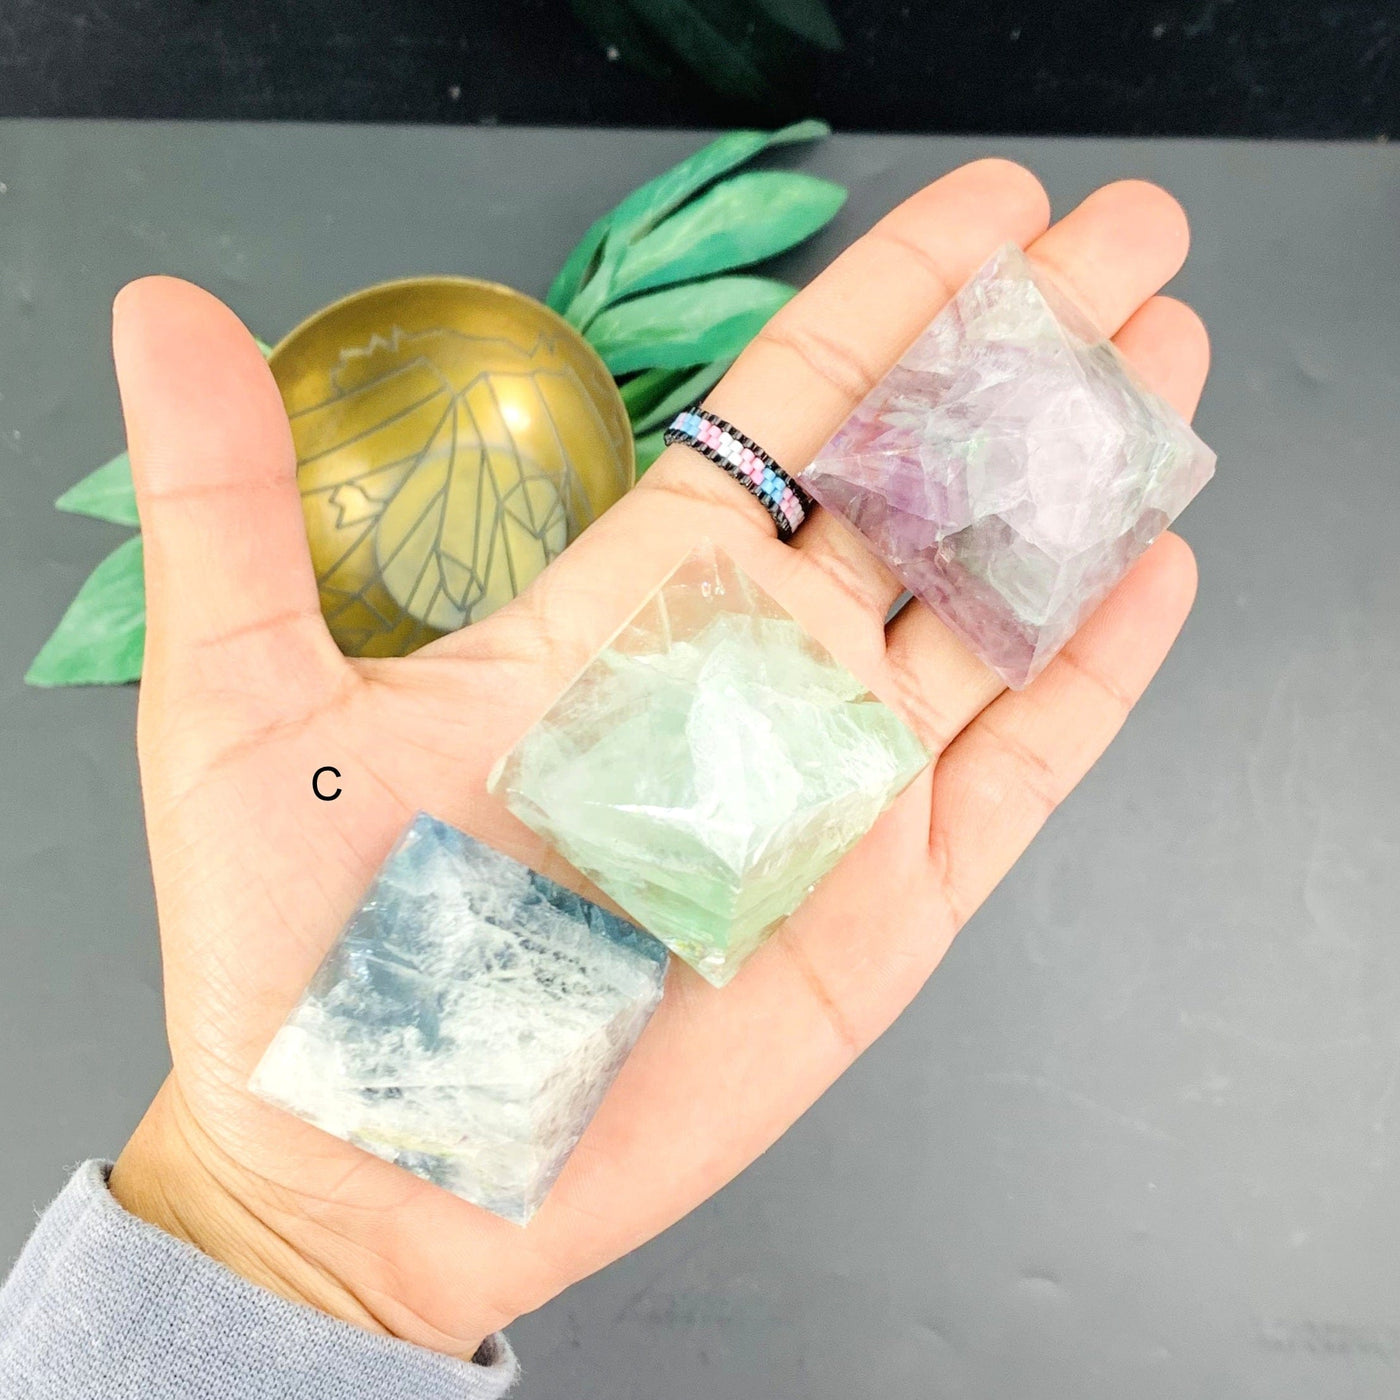 Set C of the Small Fluorite Pyramid on hand